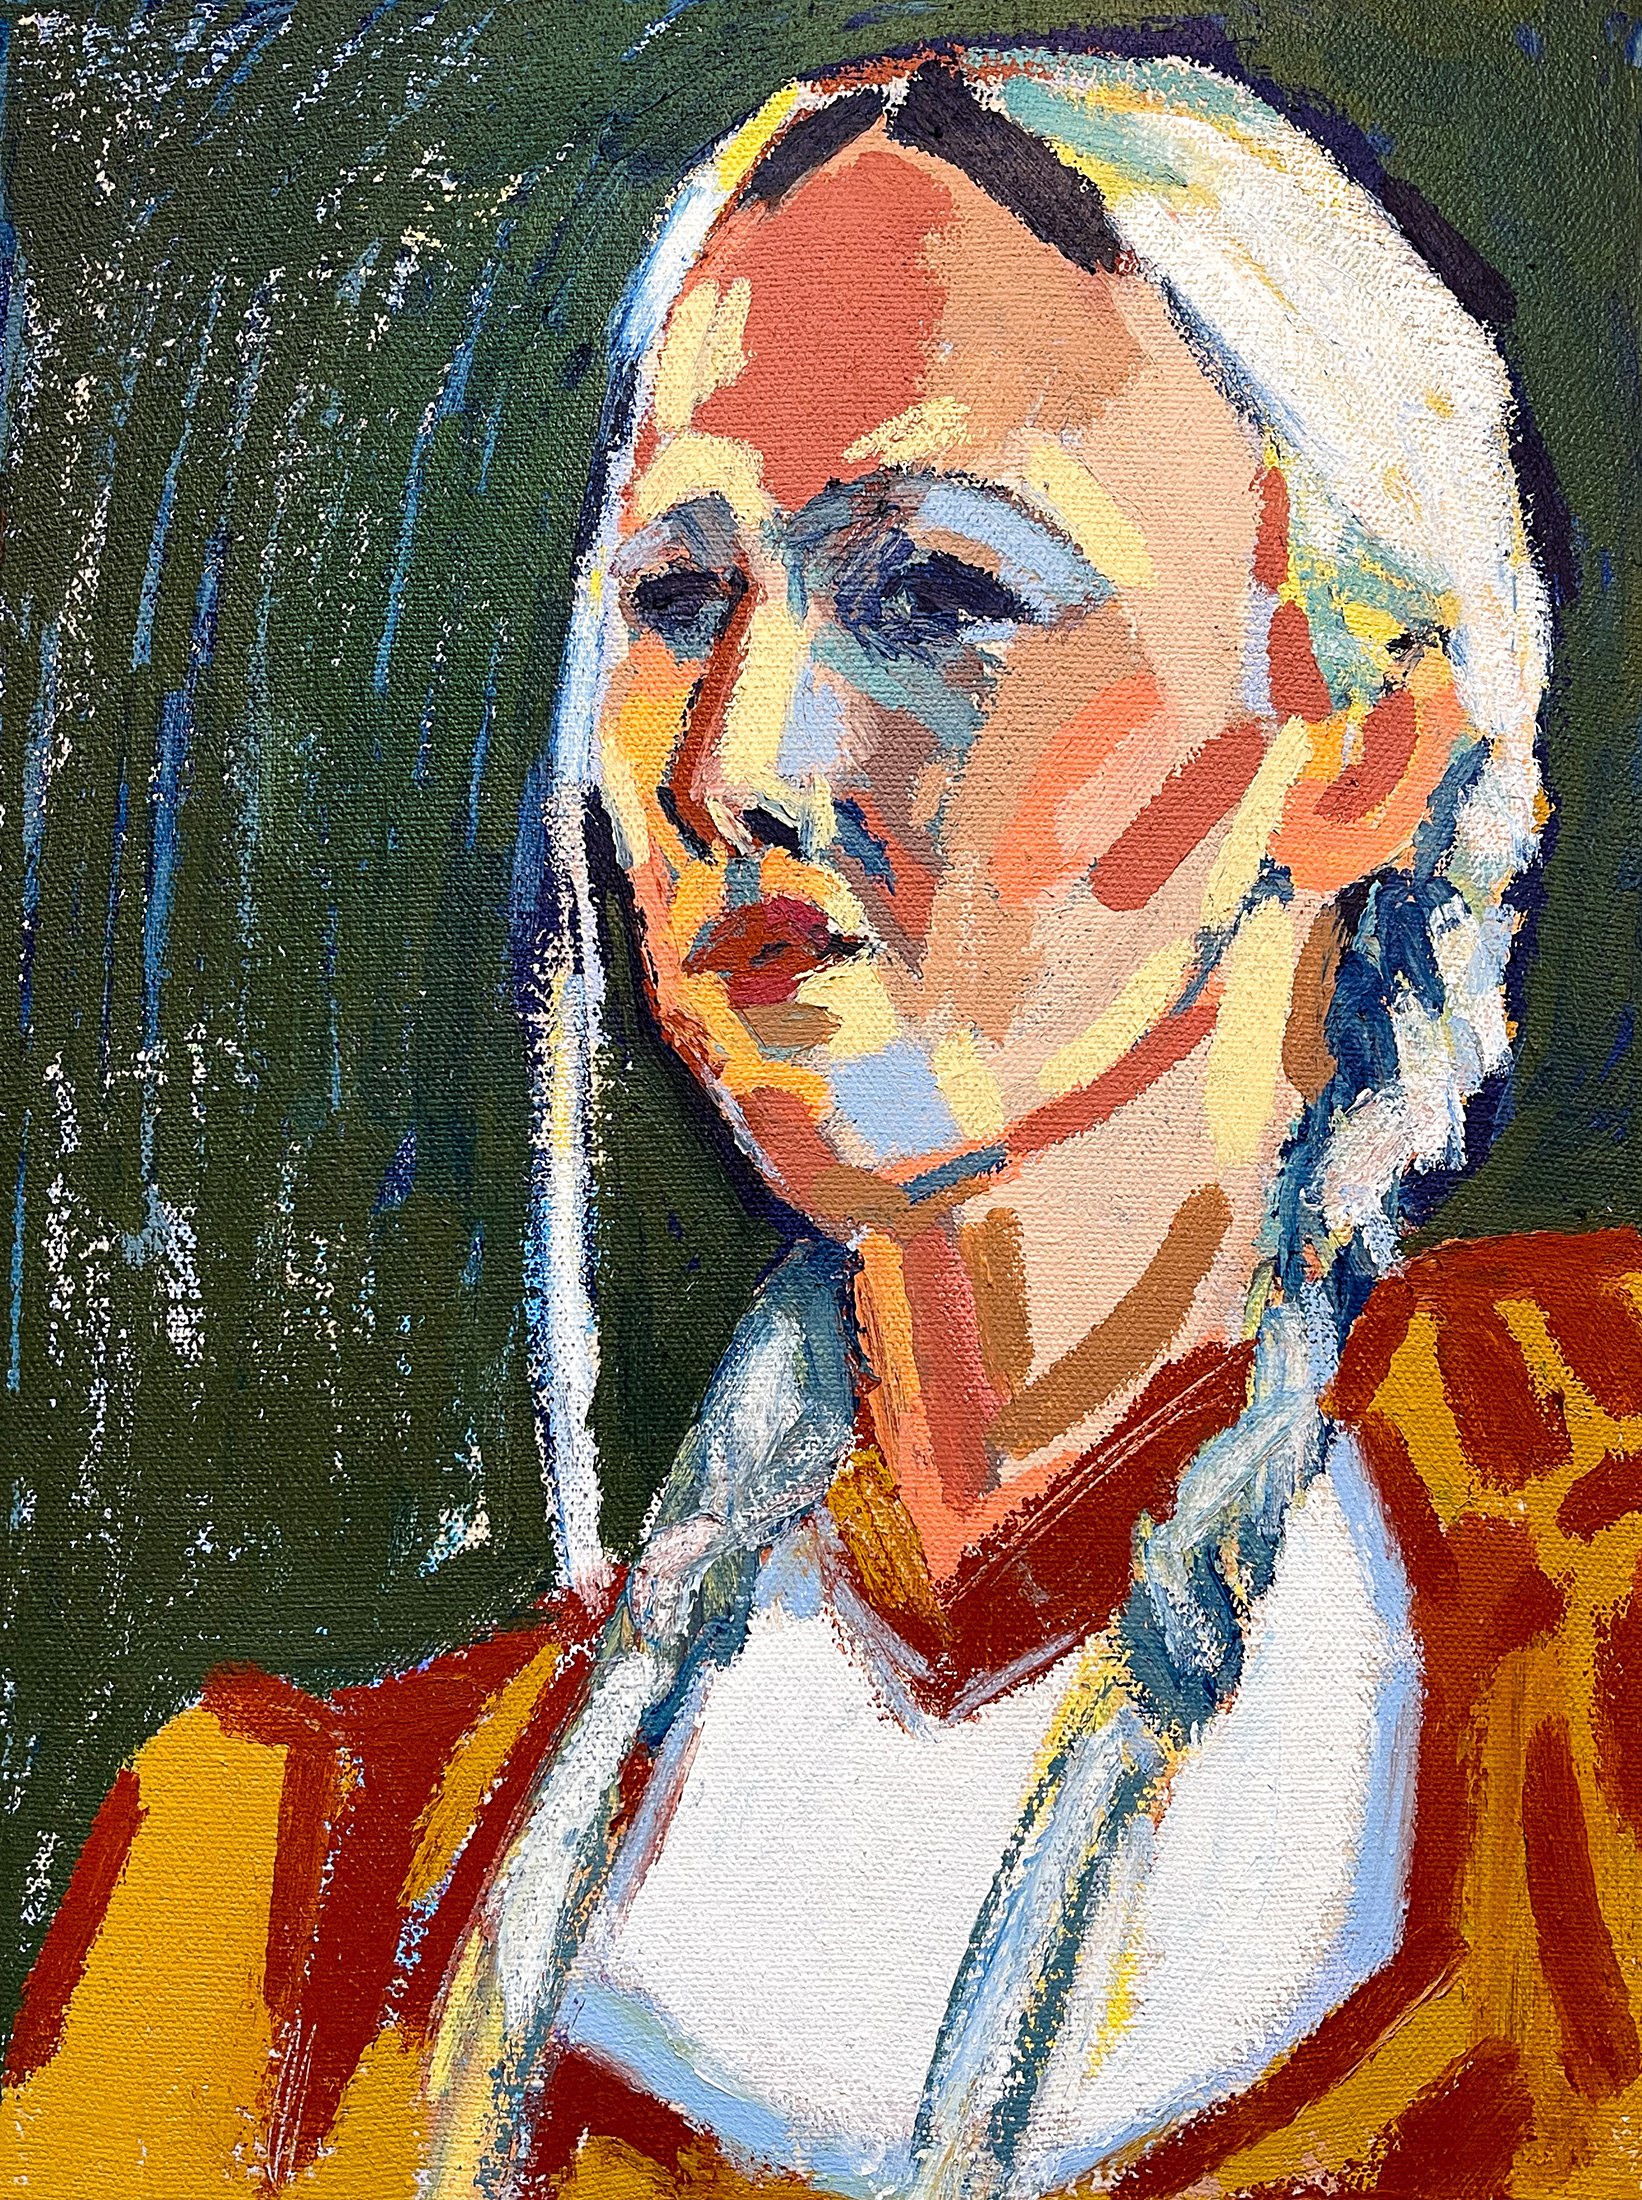 Francis with White Braids, 2022 - tempera sticks on canvas, 12x16in